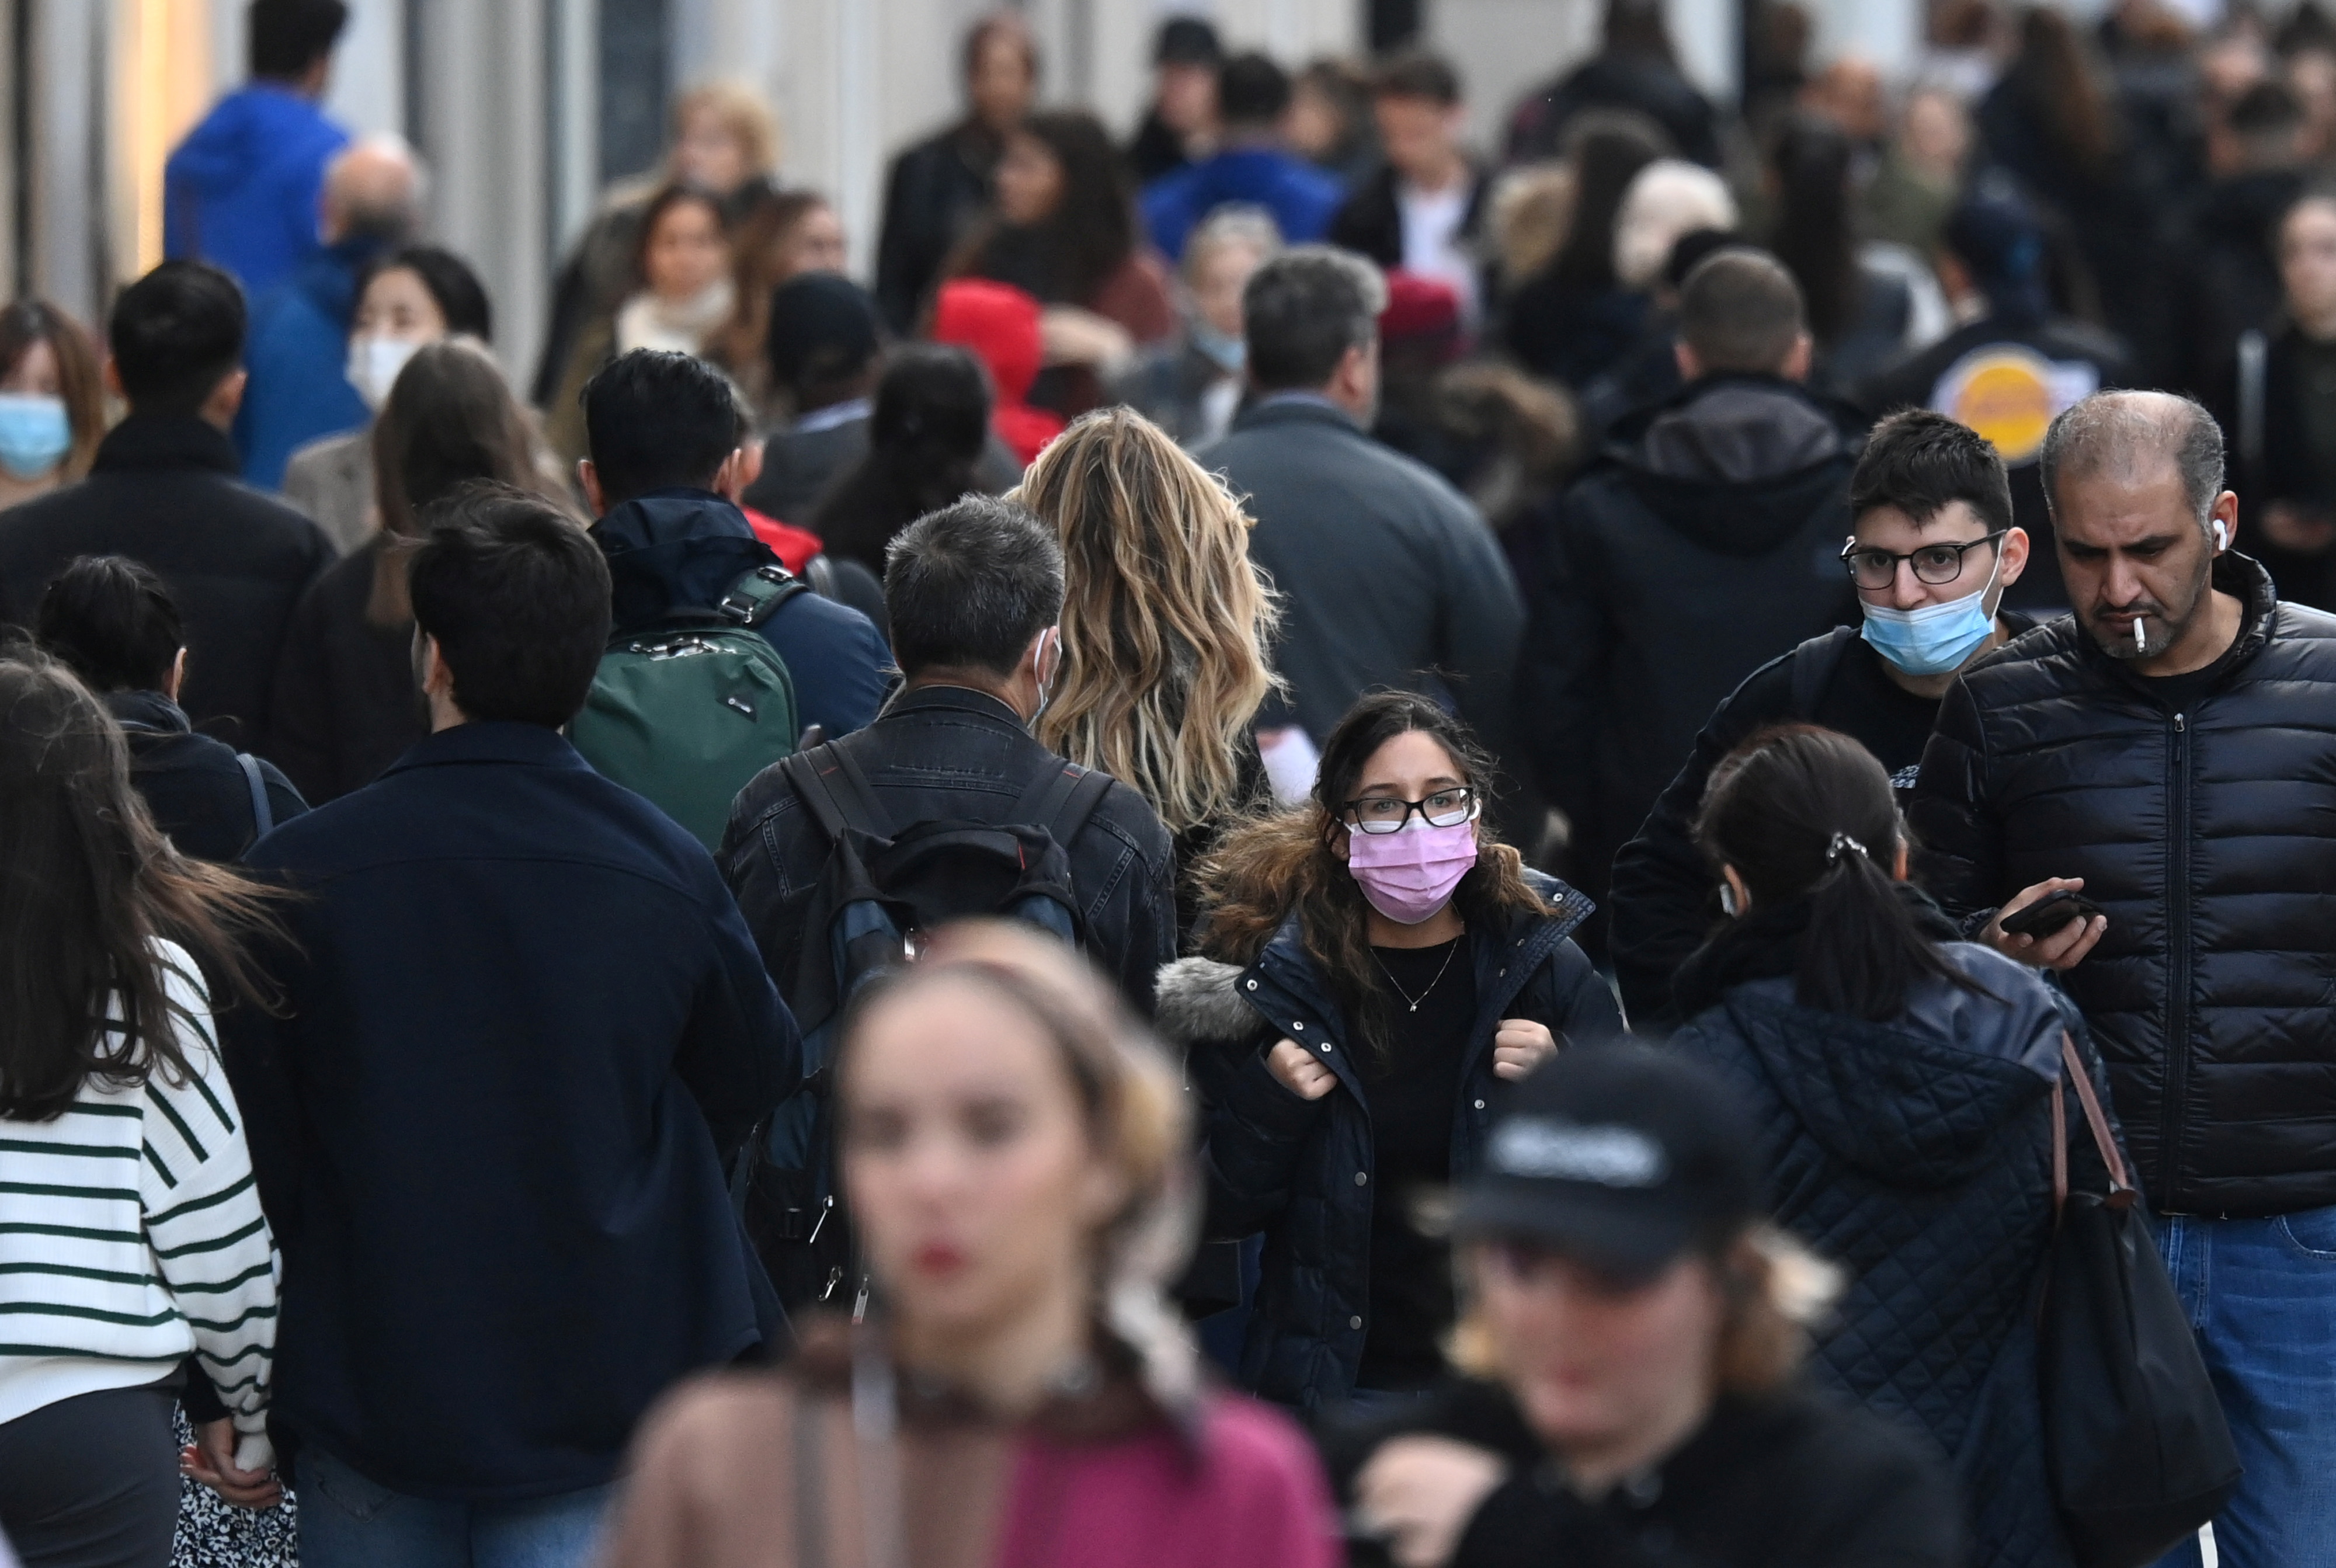 Shoppers, some wearing masks, walk along Oxford Street amidst the spread of the coronavirus disease (COVID-19) pandemic, in London